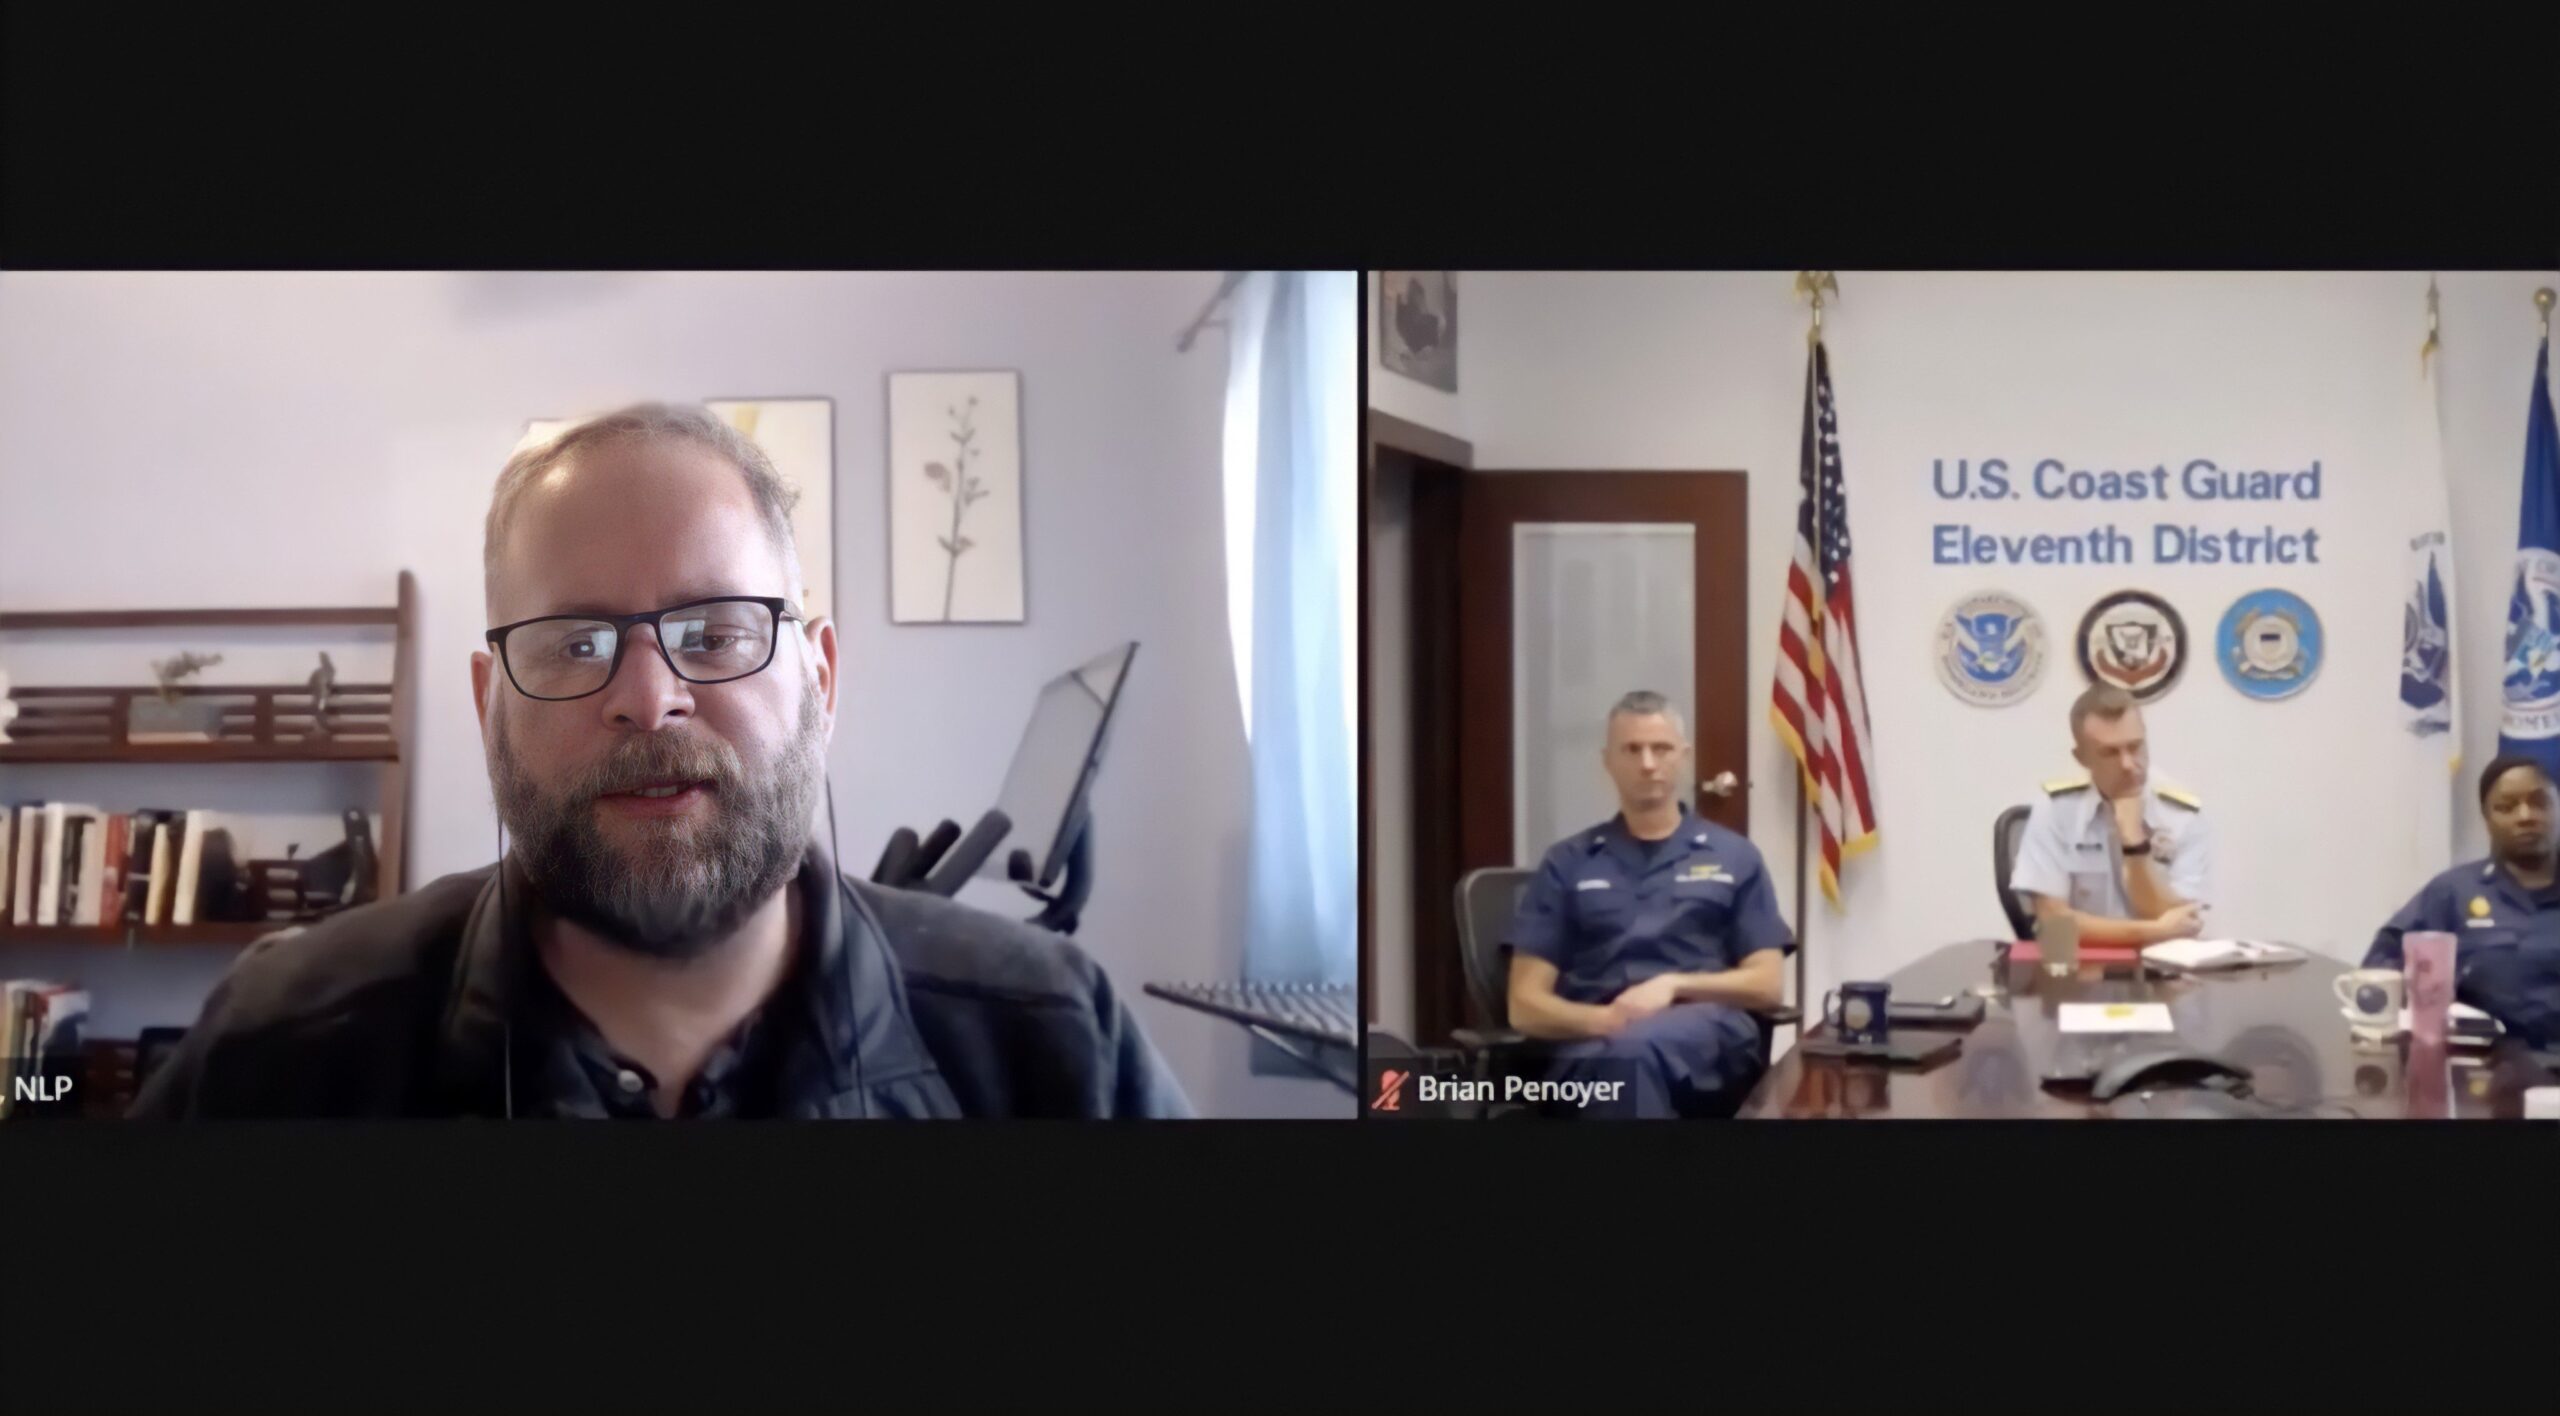 EXCLUSIVE LEAKED VIDEO: Coast Guard Collaborate with Leftwing Hack to Indoctrinate Guardsmen on Leftist Propaganda in Forced 2-Hour Zoom Meeting Training | The Gateway Pundit | by Jim Hᴏft